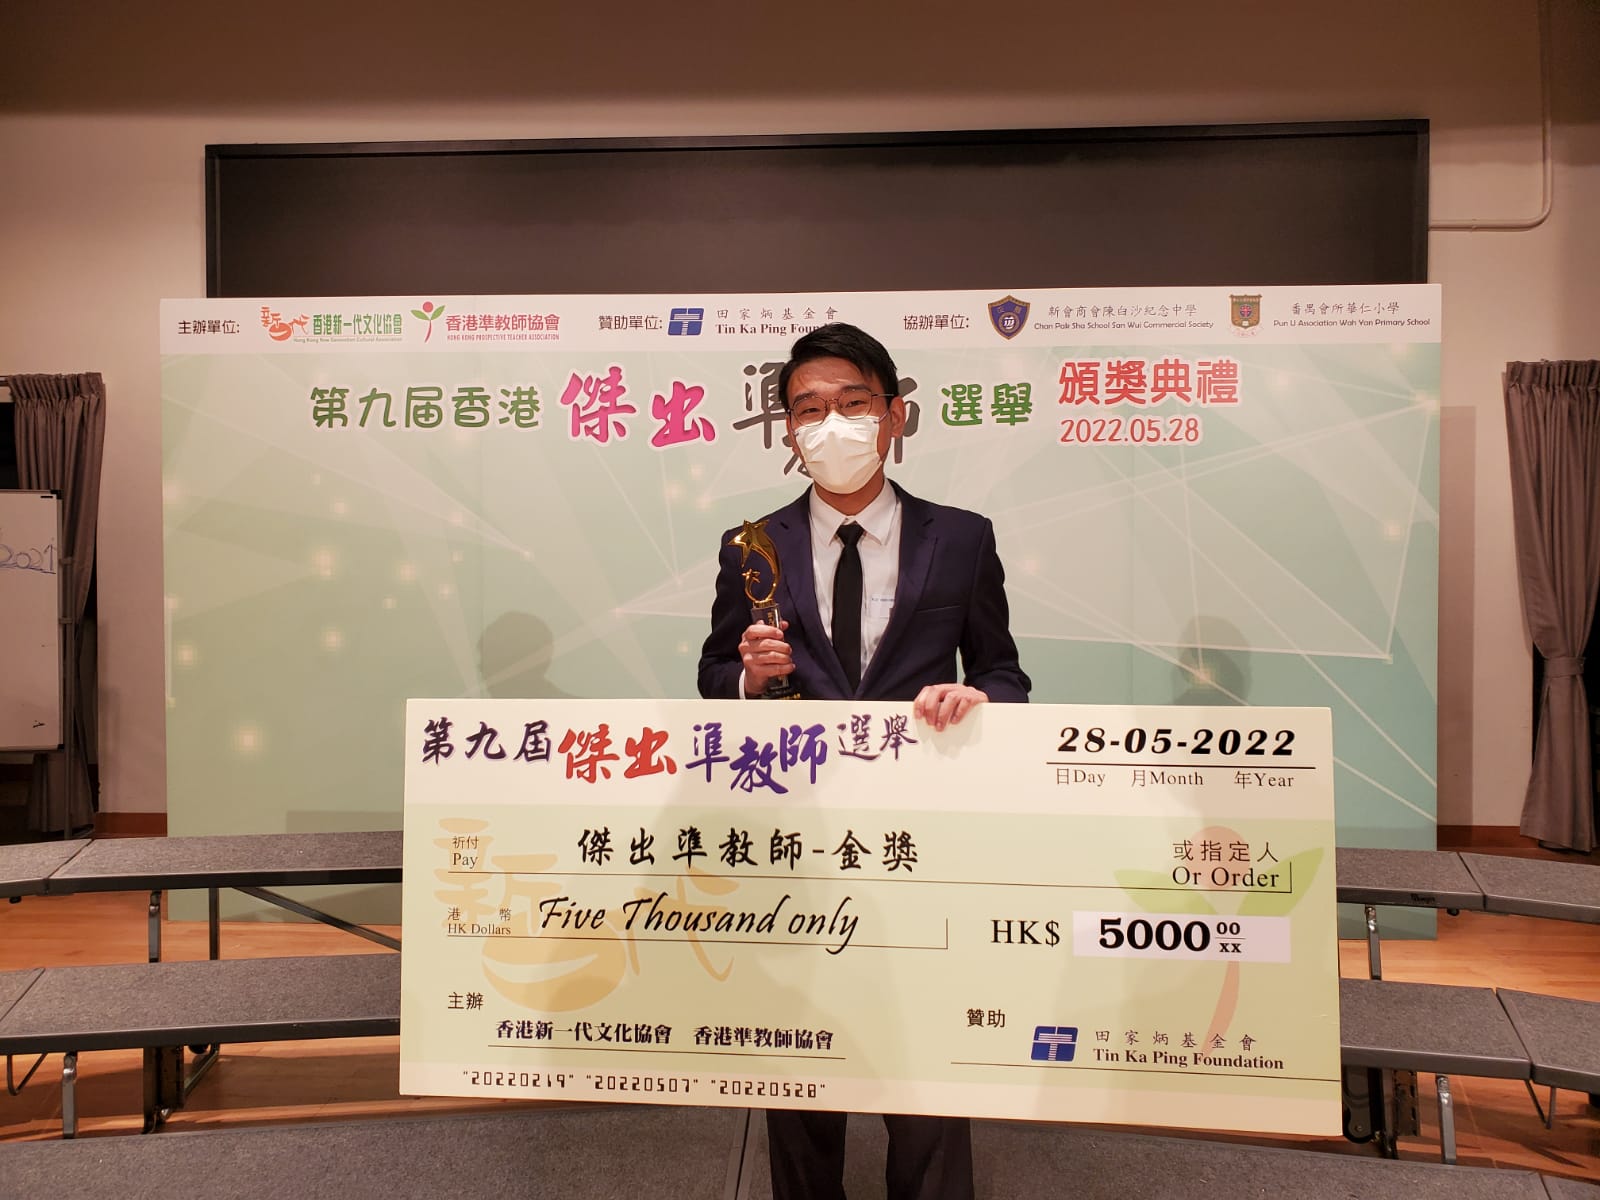 Carlos Chow wins the championship of “The 9th Hong Kong Outstanding Prospective Teachers Award”